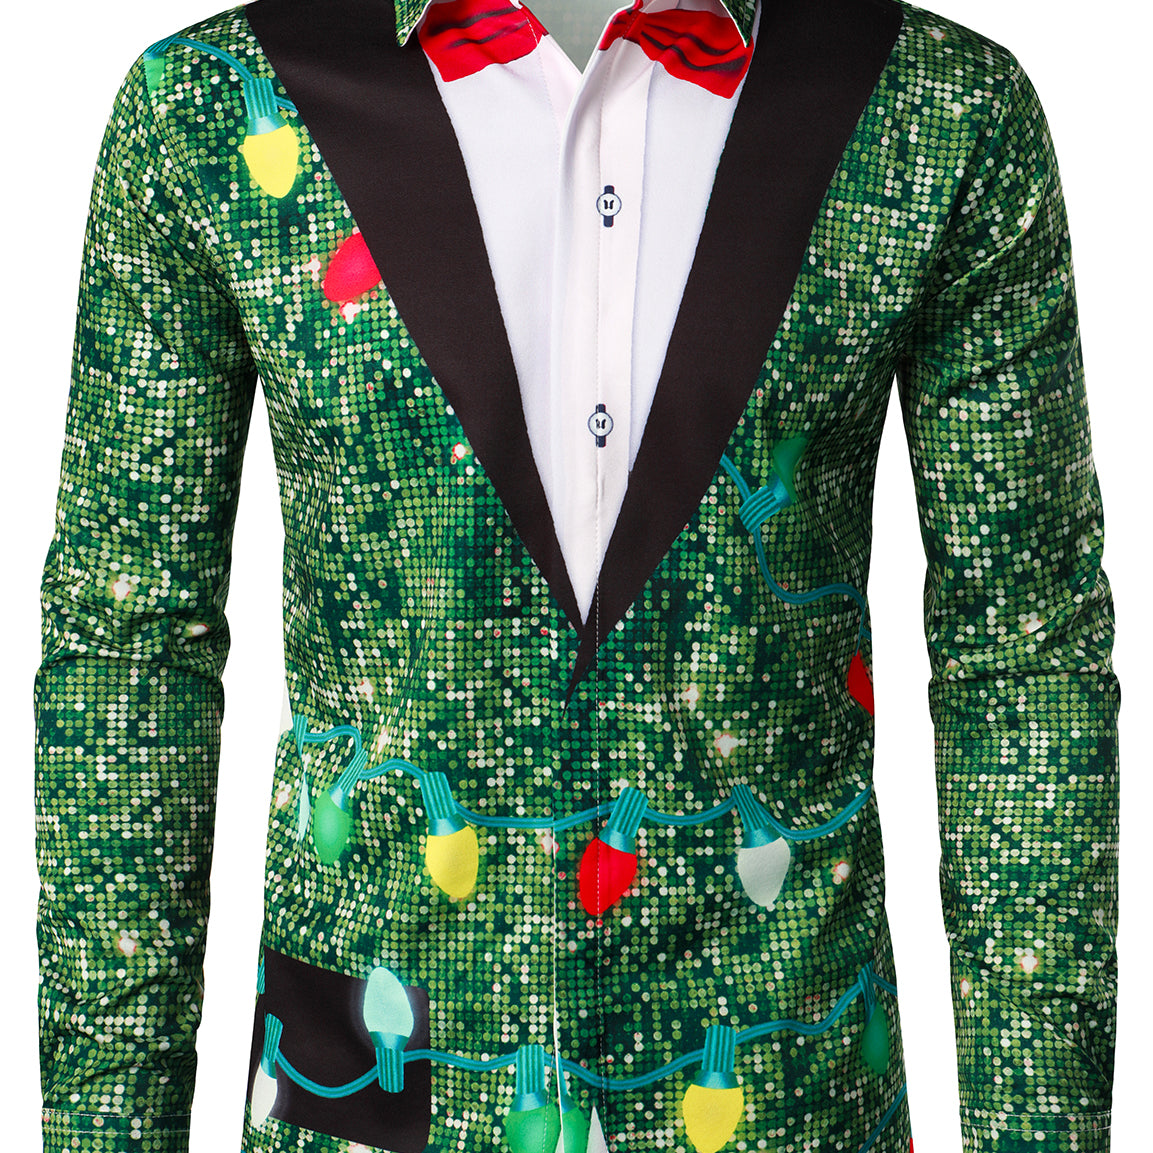 Men's Disco Christmas Tree Funny Outfit Xmas Themed Top Holiday Green Button Long Sleeve Shirt